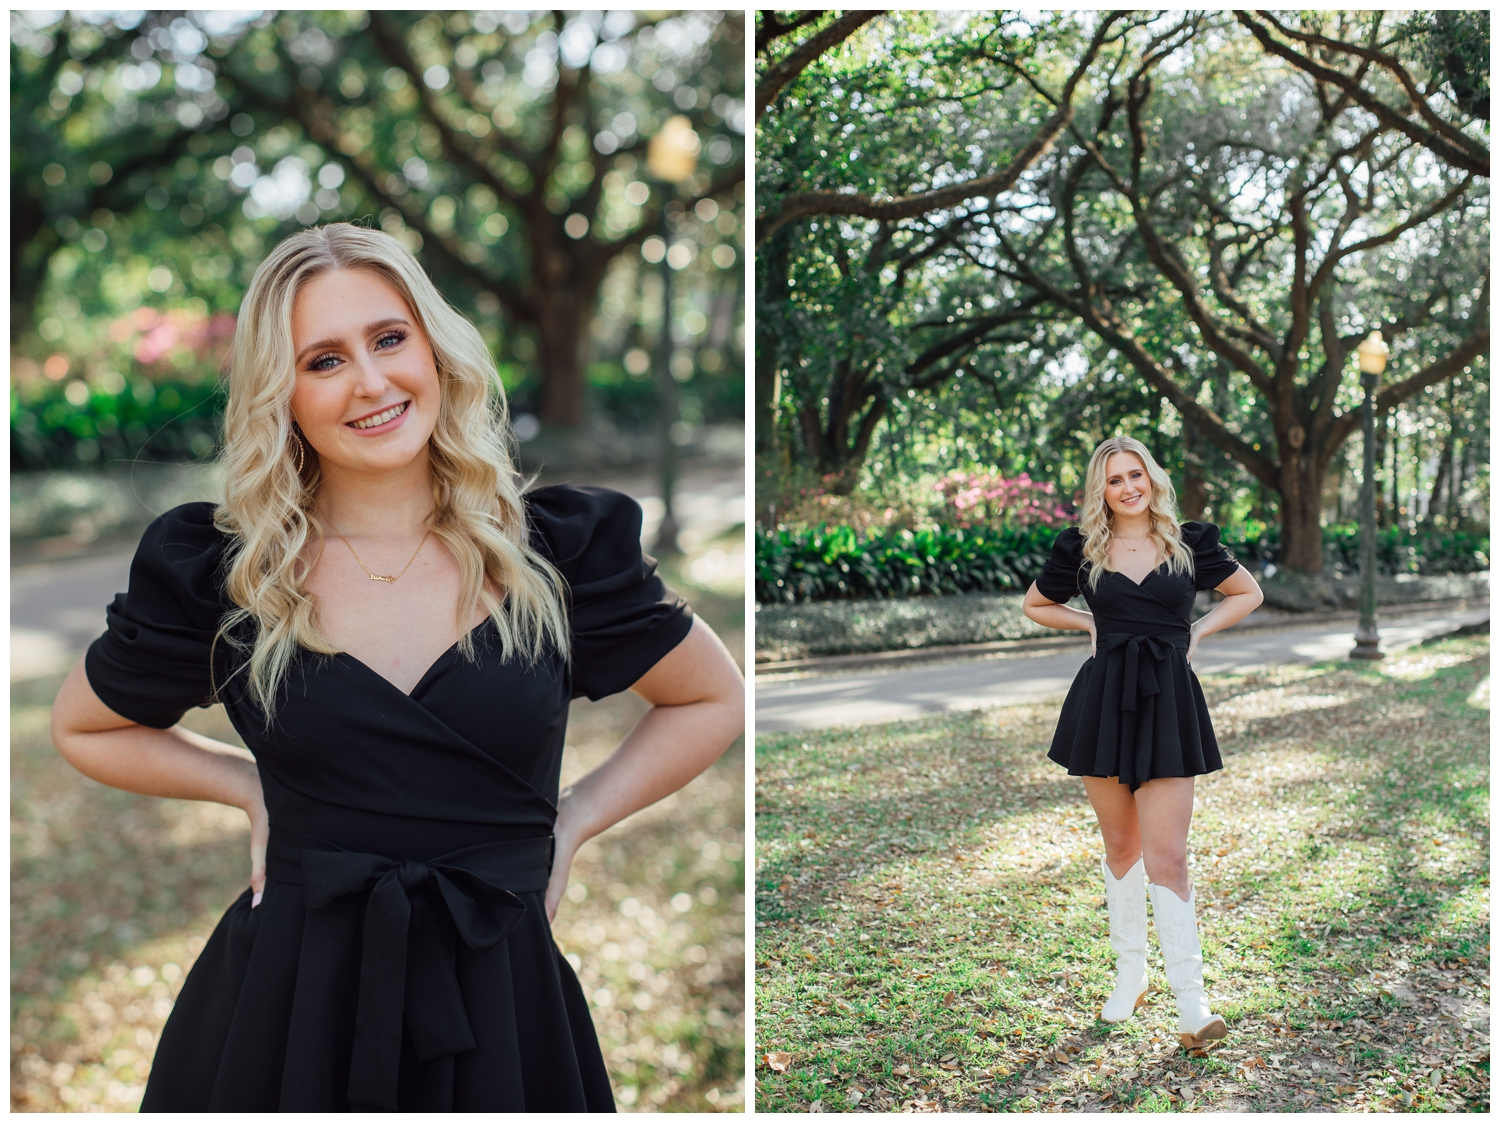 Senior pictures Houston Texas girl in black dress and white boots outdoors